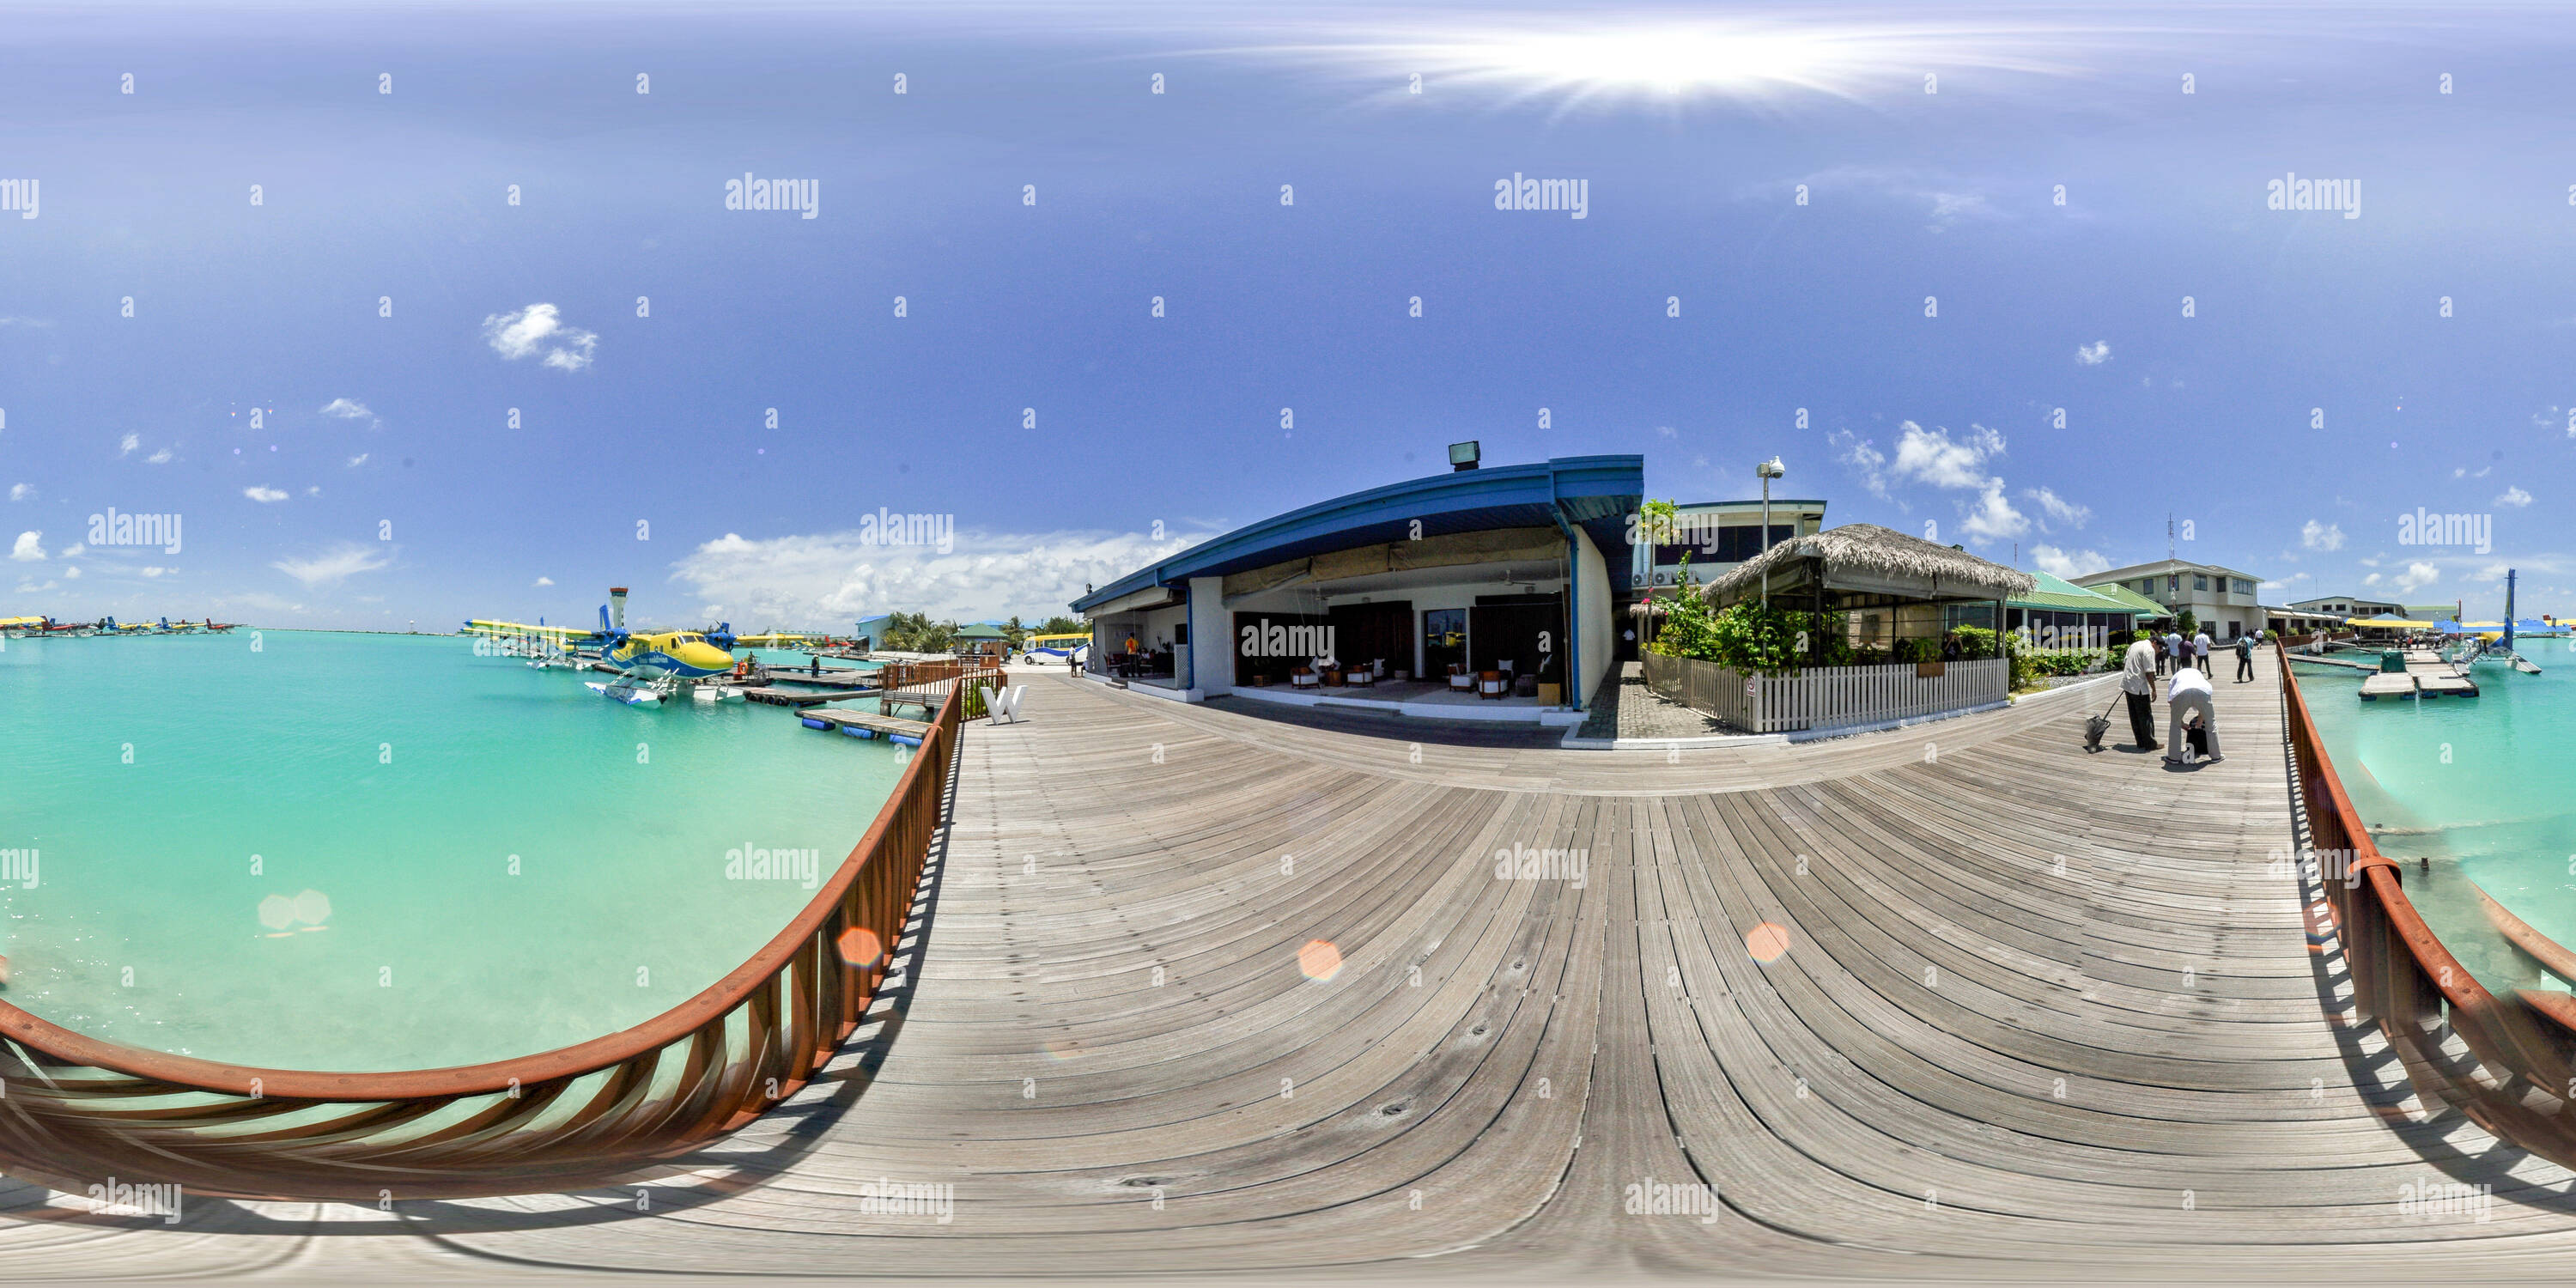 360 degree panoramic view of Trans Maldivian Air Taxi Terminal in Maldives - The worlds Largest Seaplane Terminal